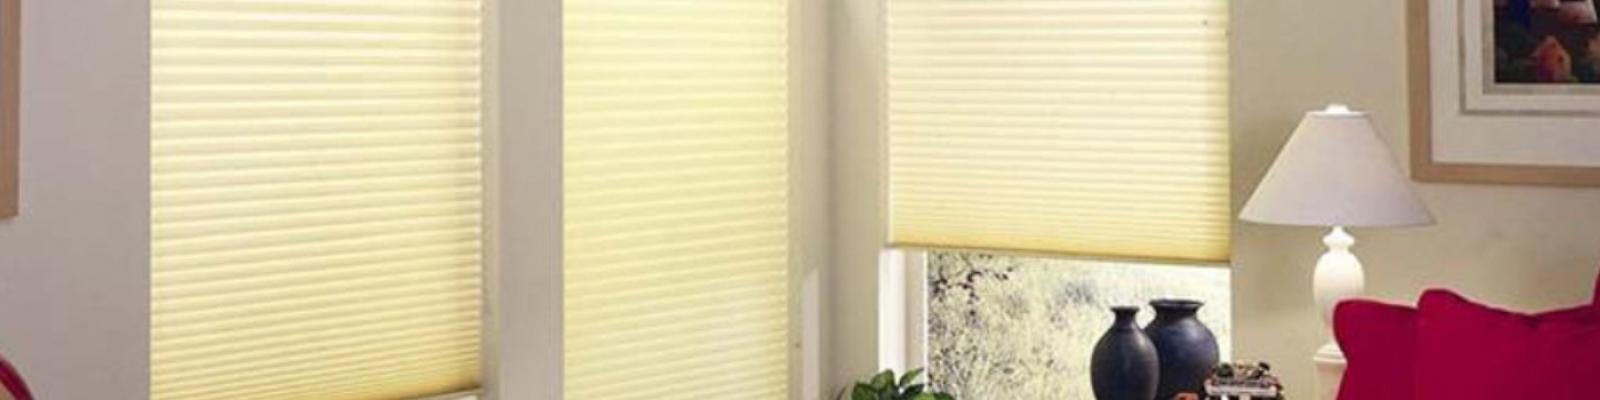 Ideal Blinds